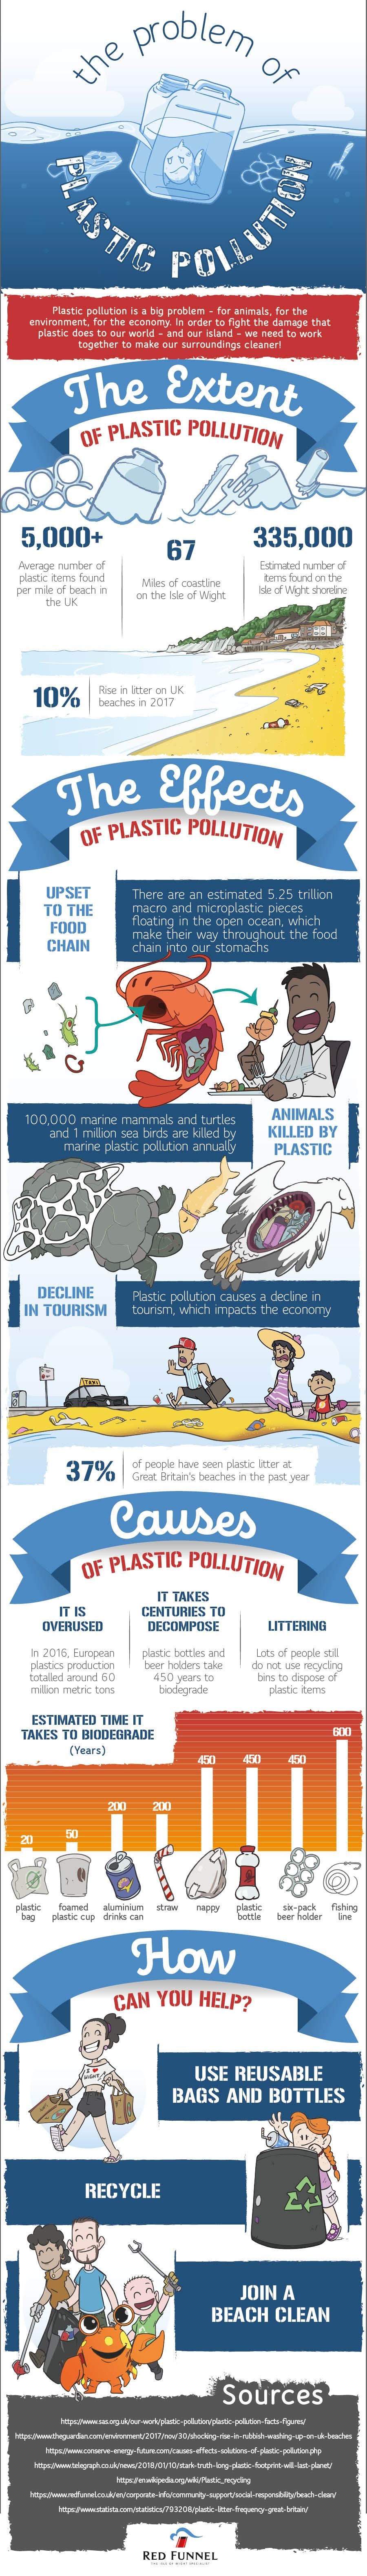 Stopping Plastic Pollution is Not Someone Else’s Problem - Infographic